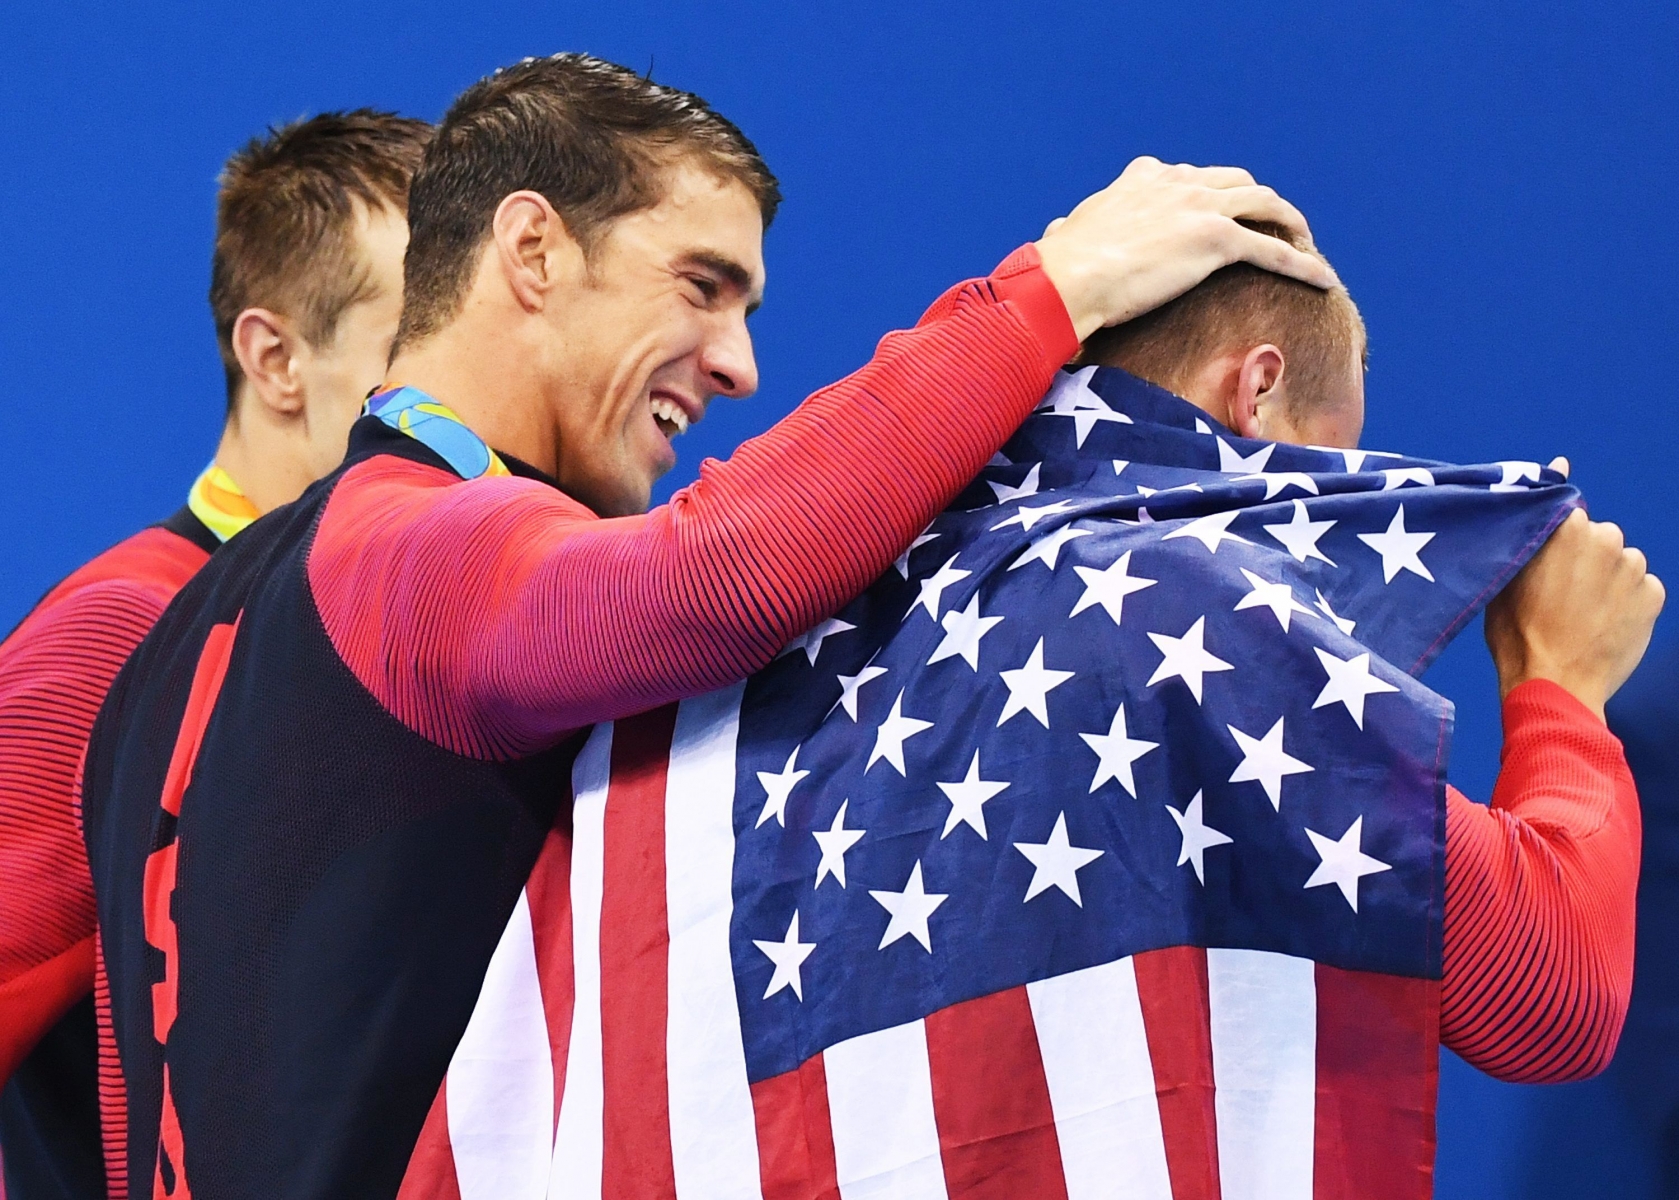 epa05463981 Geold medalists Michael Phelps of USA hugs his teammate Caeleb Dresser (R) next to Ryan Held (L) after the medal ceremony for the men's 4x100m Freestyle relay final race of the Rio 2016 Olympic Games Swimming events at Olympic Aquatics Stadium at the Olympic Park in Rio de Janeiro, Brazil, 07 August 2016.  EPA/BERND THISSEN